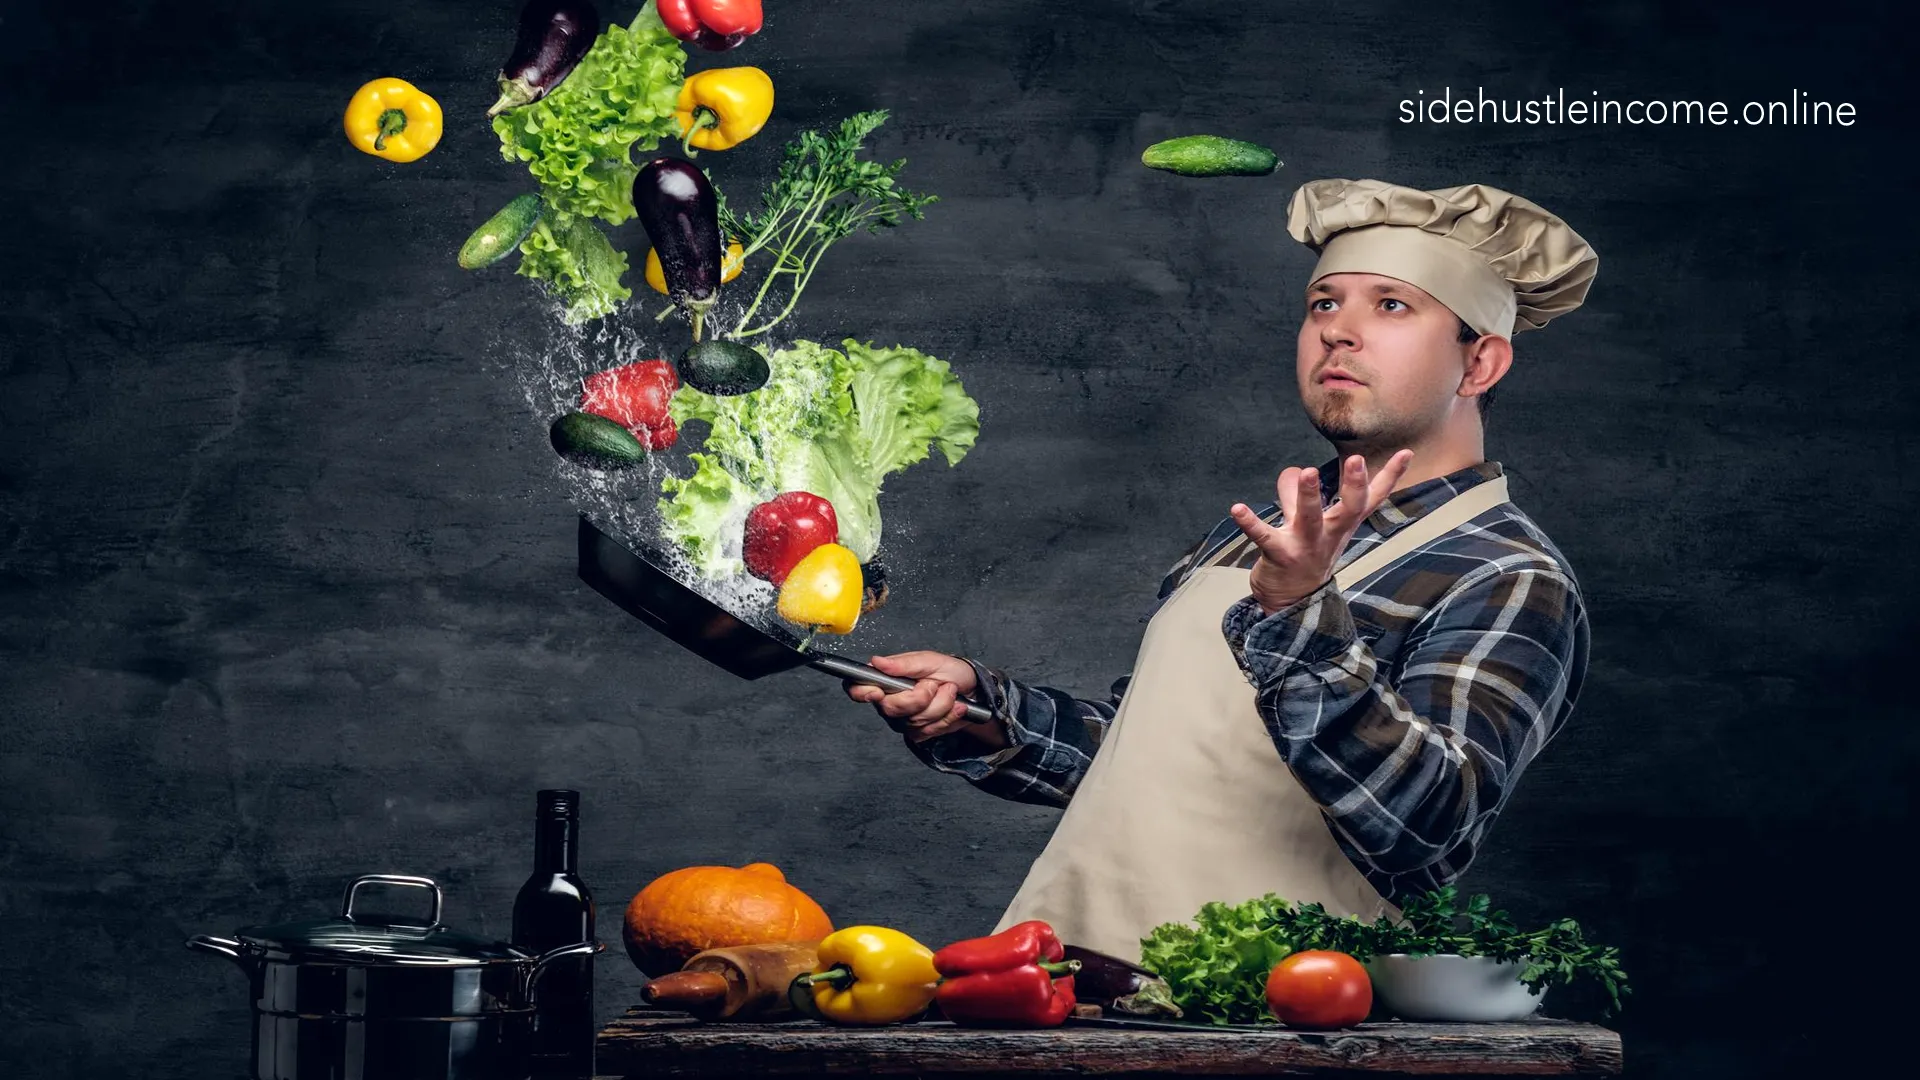 Personal Chef Jobs-Best Side Hustle to Make $5k